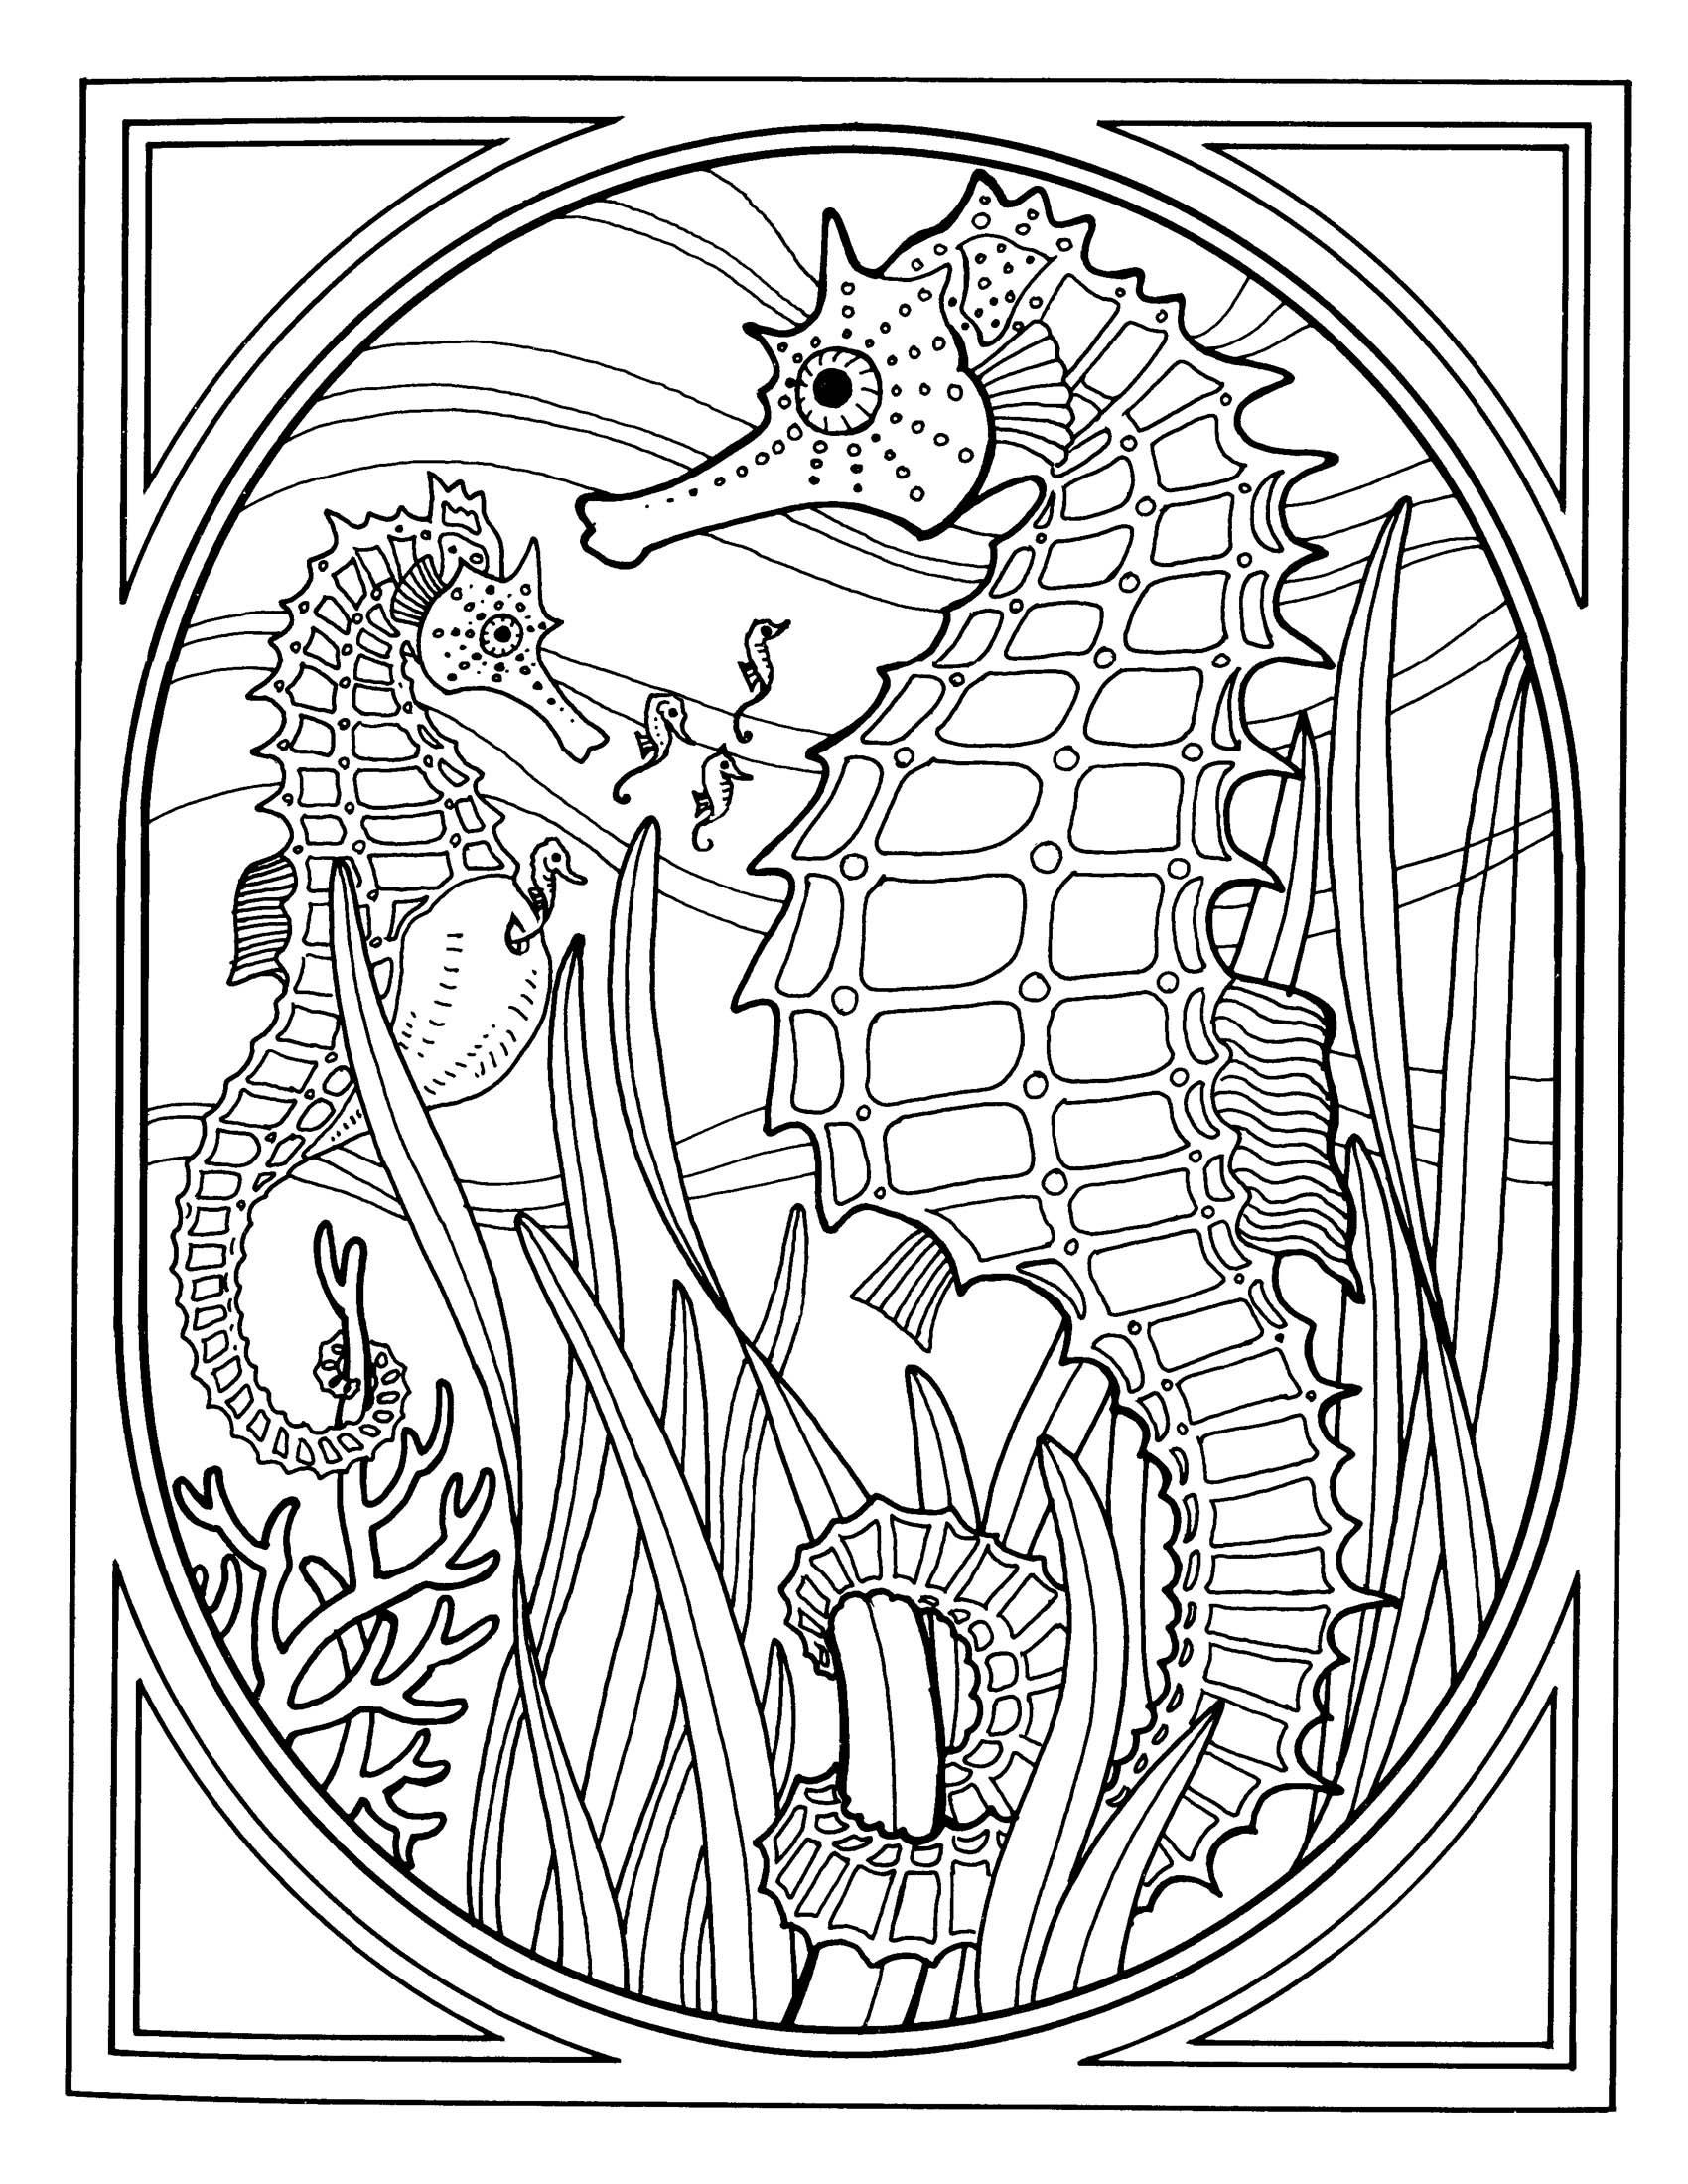 Coloring Pages: Adult Coloring Pages Rosette Intricate Patterns ...